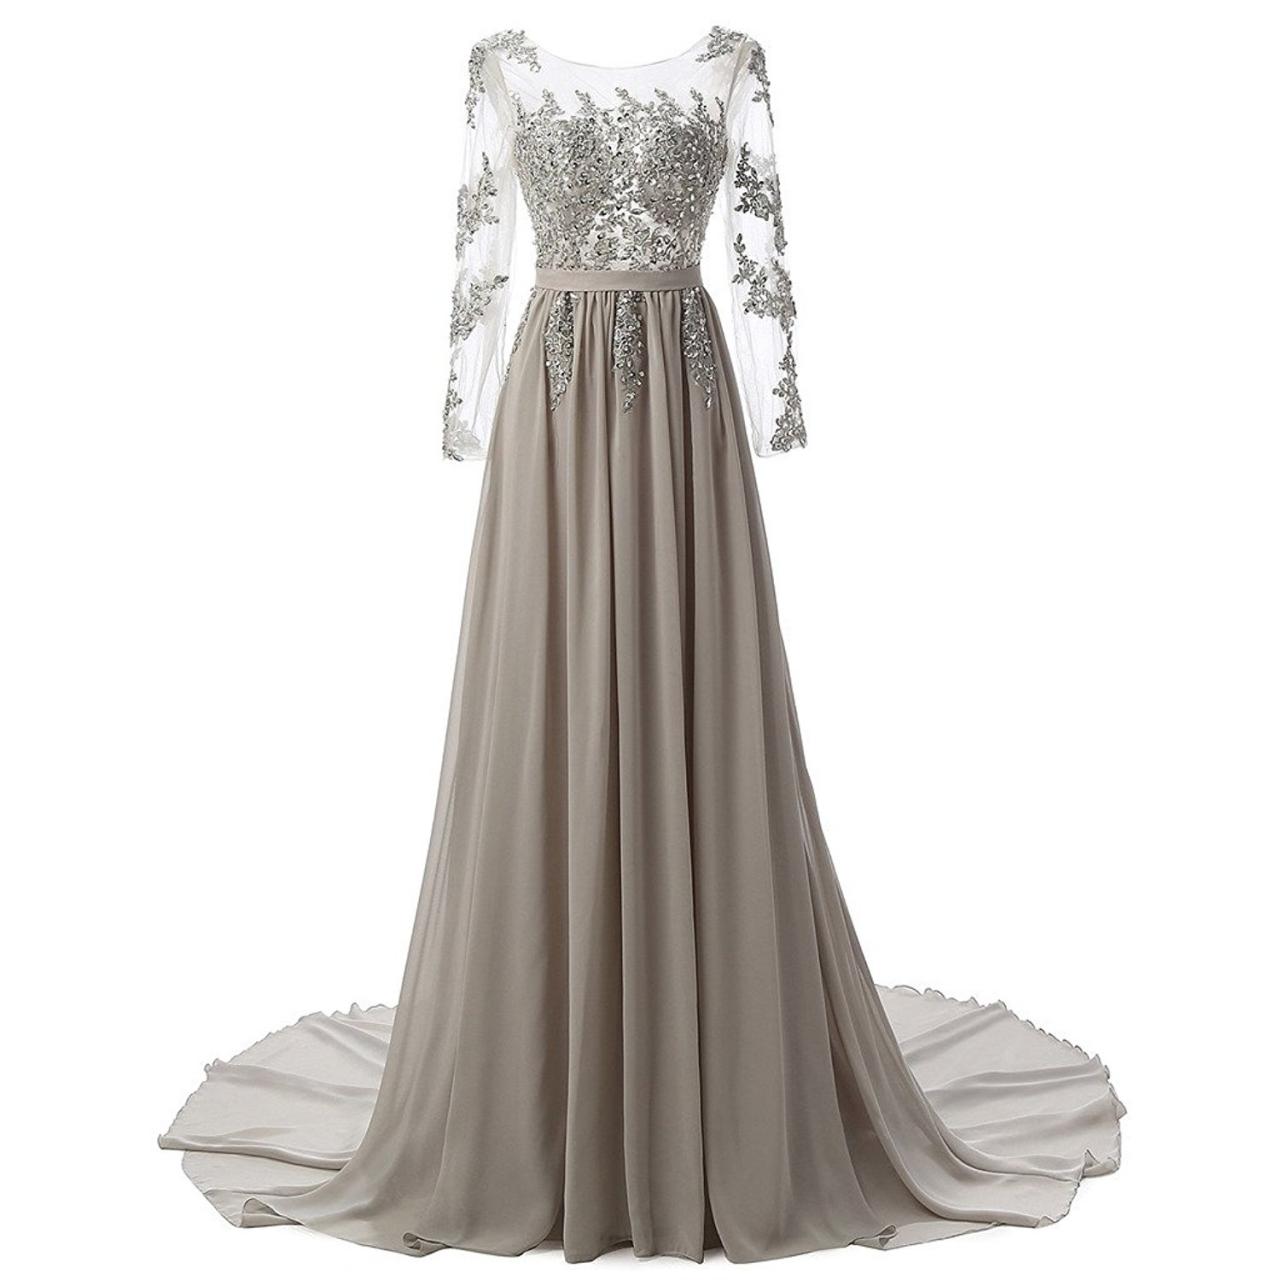 Women's Long Evening Dresses Chiffon Lace A Line Prom Party Gown With Long Sleeves Pd086